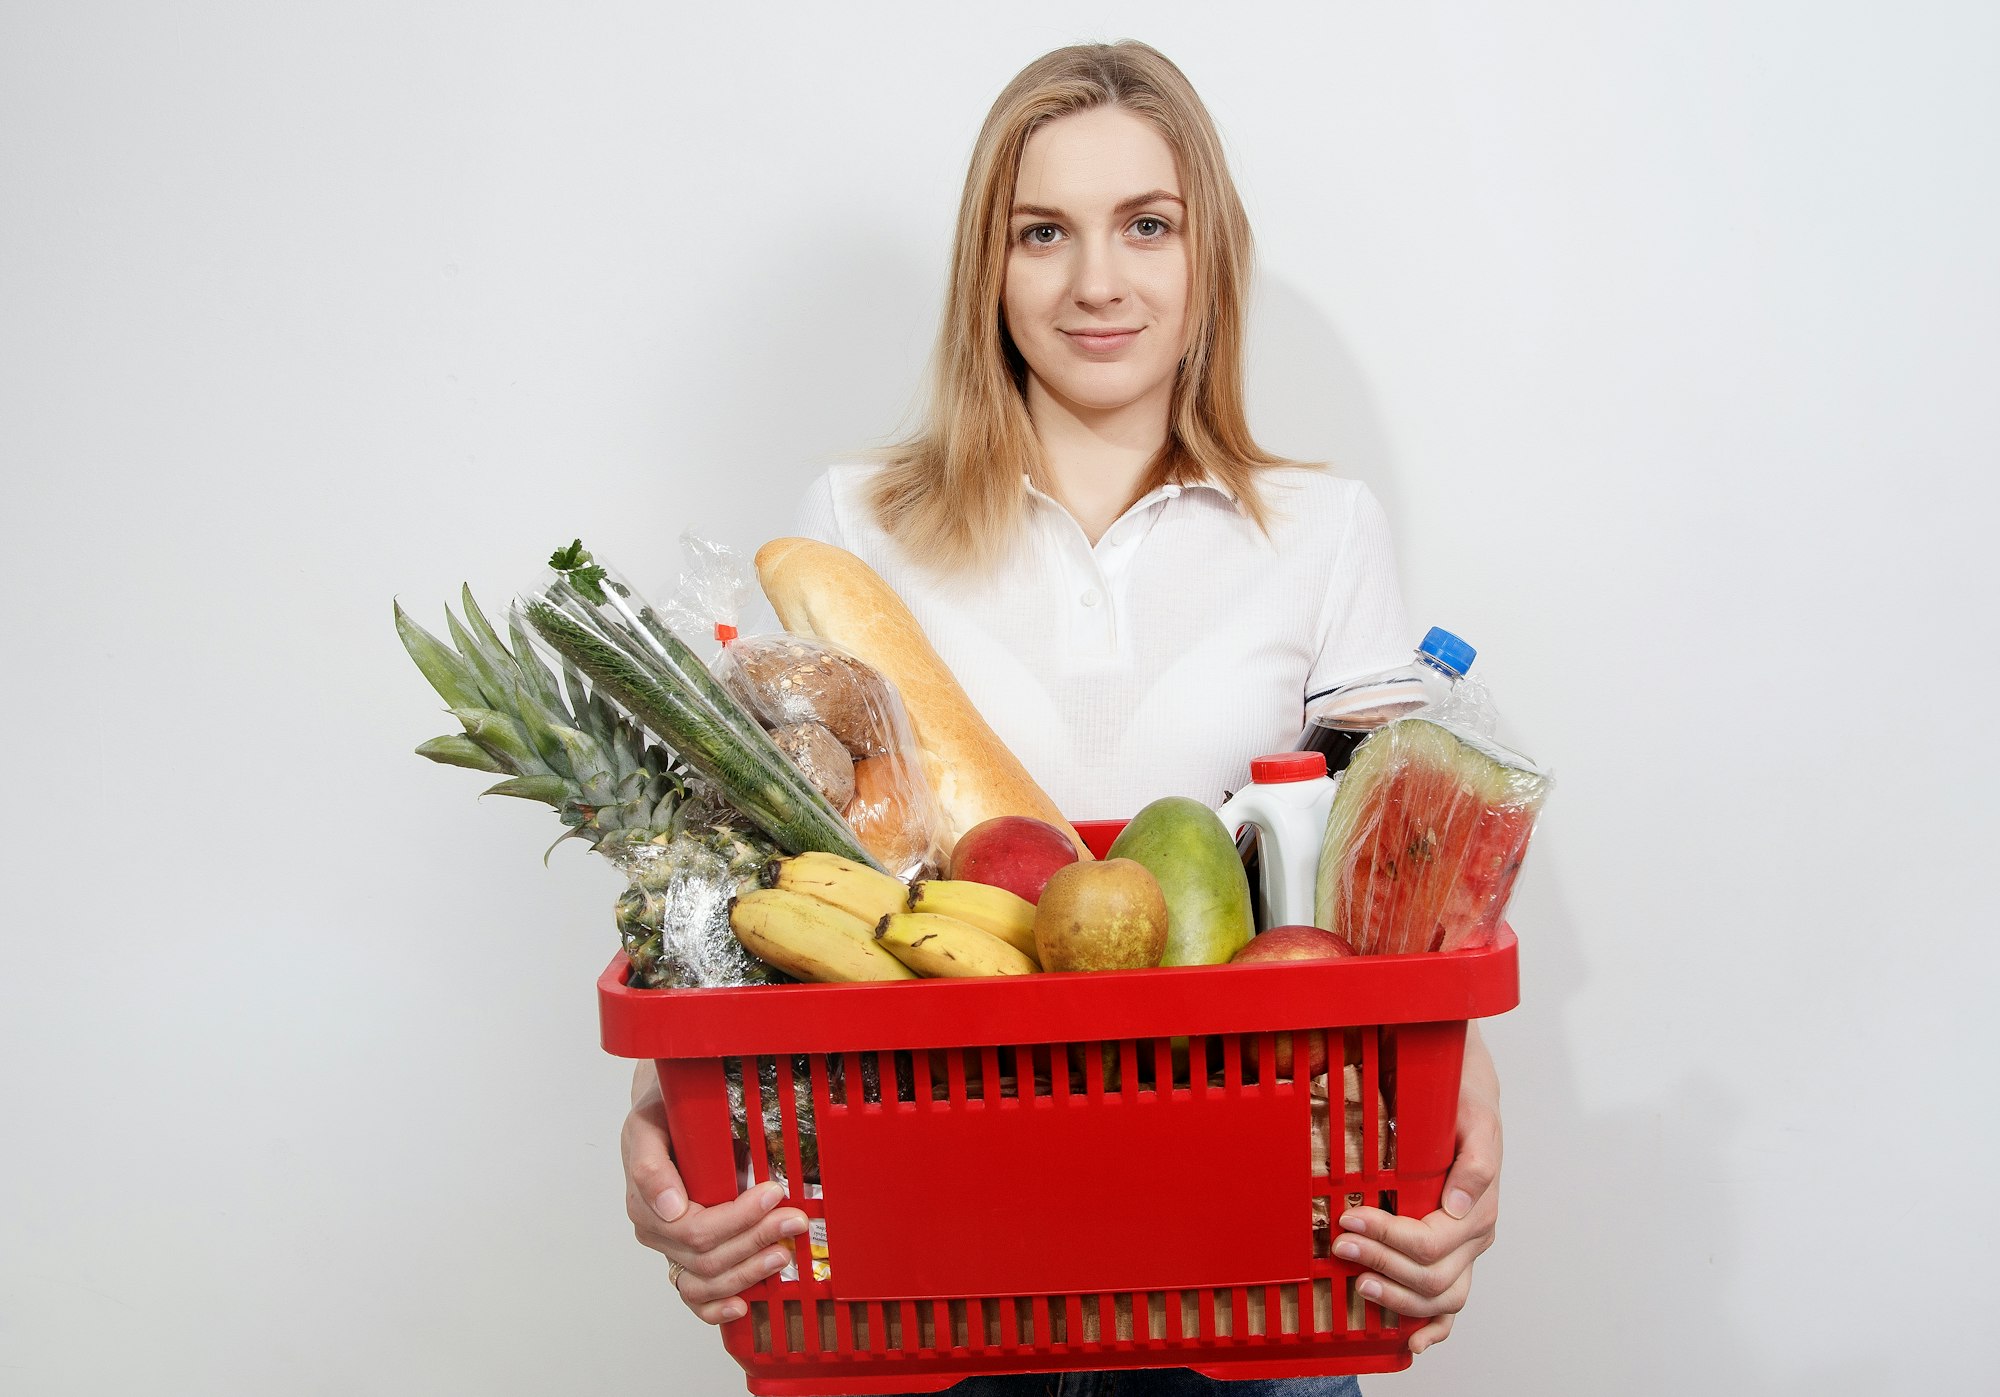 Young woman with goods in basket. The girl made a purchase. Girl holding a basket of groceries. Vegetables
